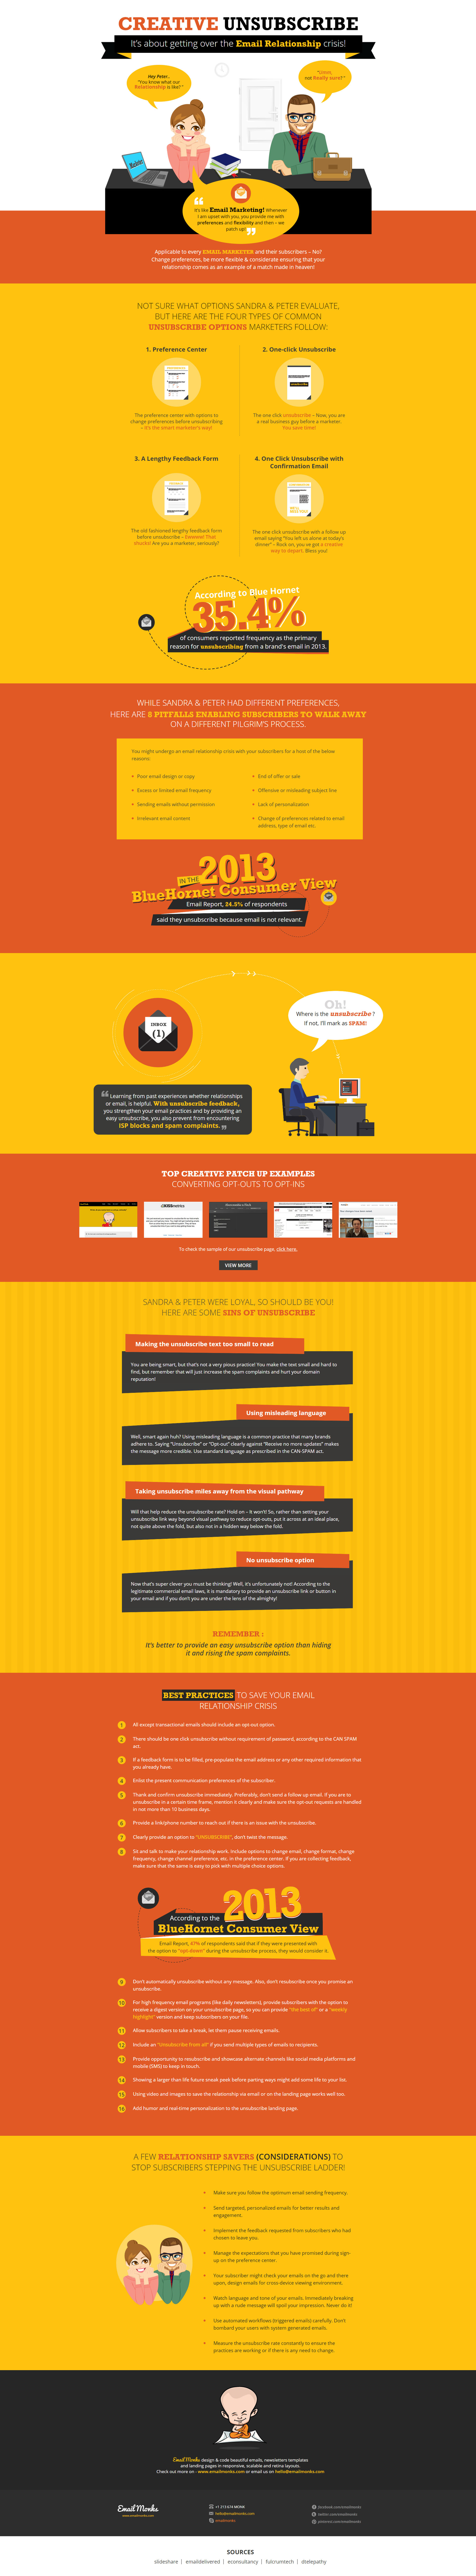 Unsubscribe Best Practices Infographic